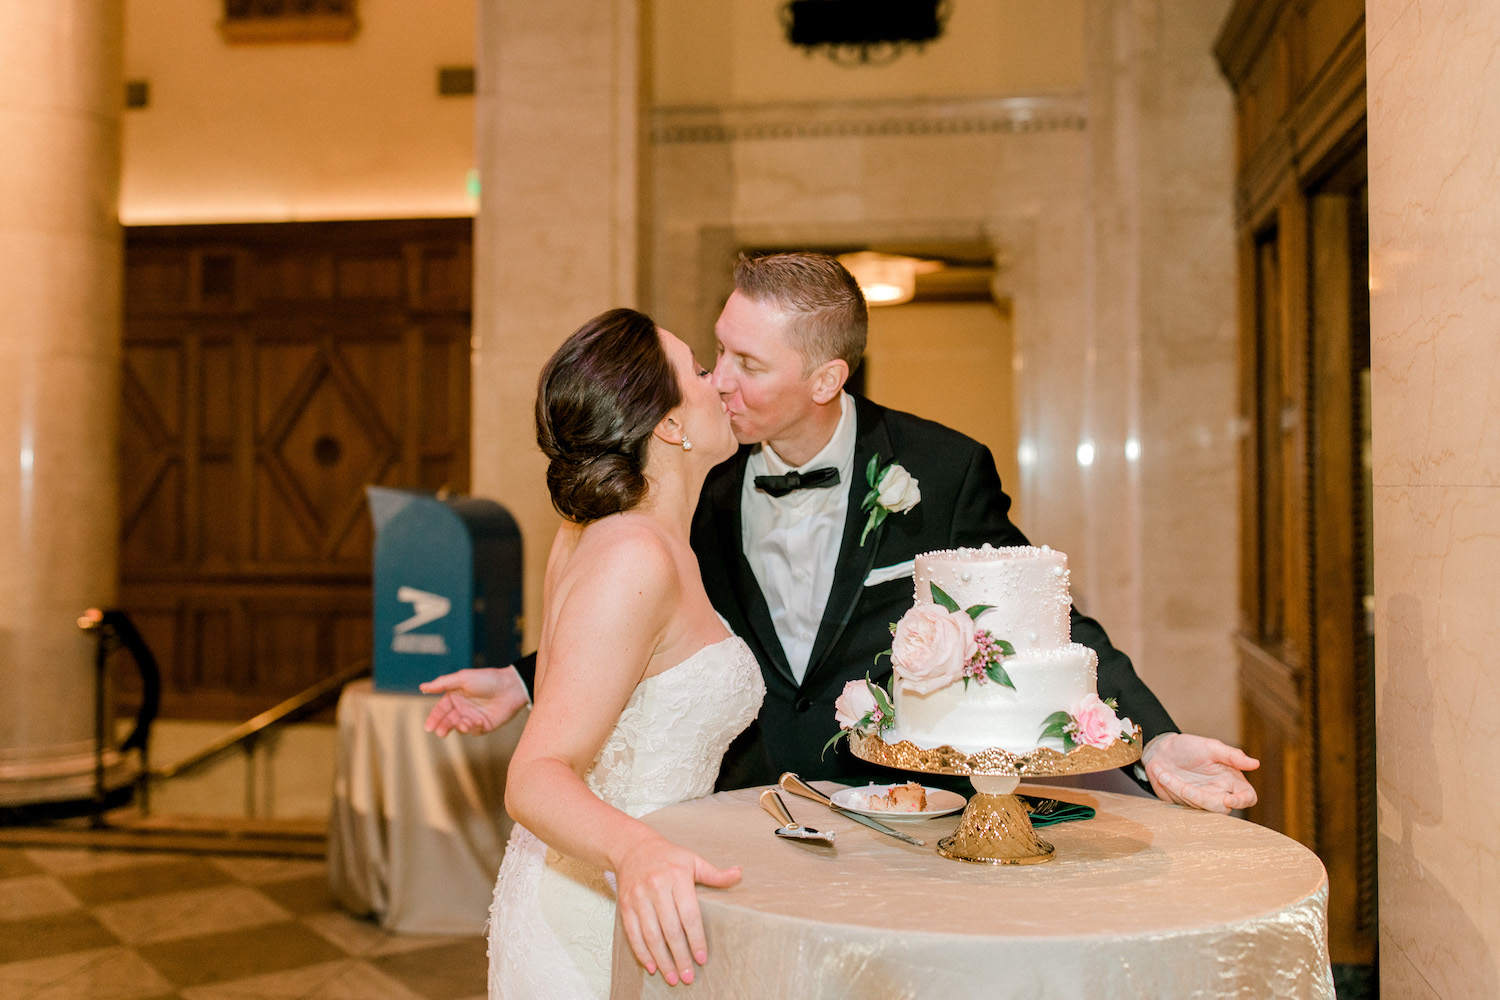 Bride and groom kissing after cake cutting